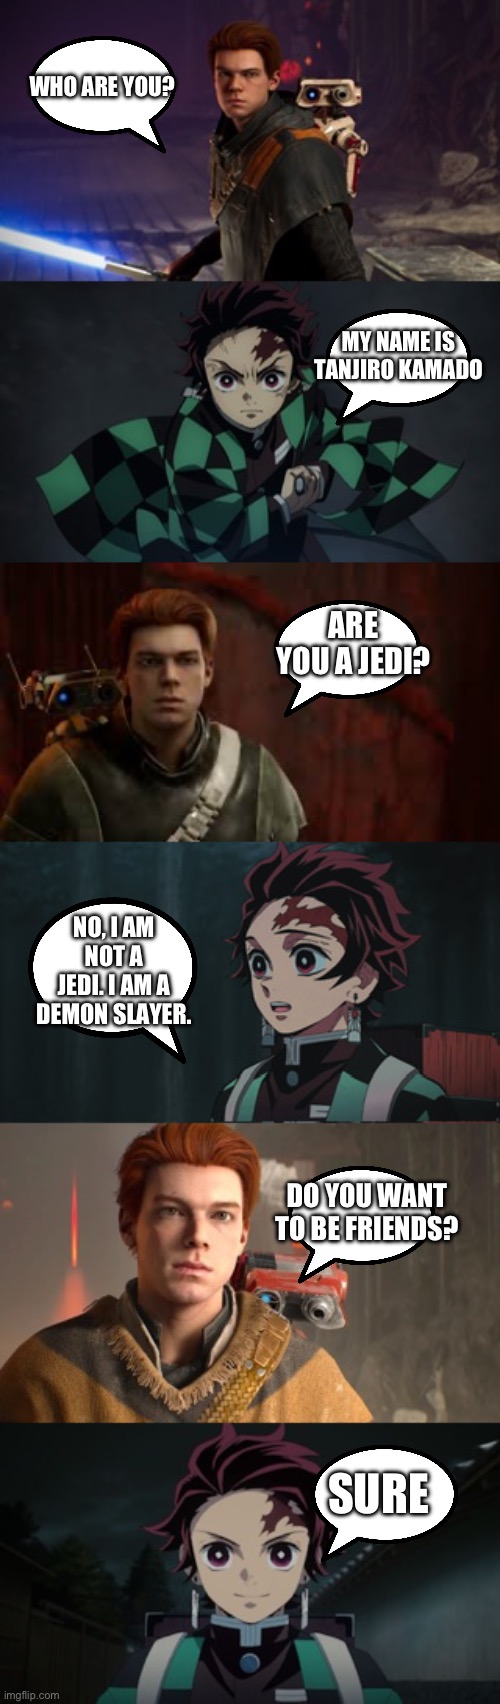 Cal Kestis meets Tanjiro Kamado | WHO ARE YOU? MY NAME IS TANJIRO KAMADO; ARE YOU A JEDI? NO, I AM NOT A JEDI. I AM A DEMON SLAYER. DO YOU WANT TO BE FRIENDS? SURE | image tagged in star wars,demon slayer | made w/ Imgflip meme maker